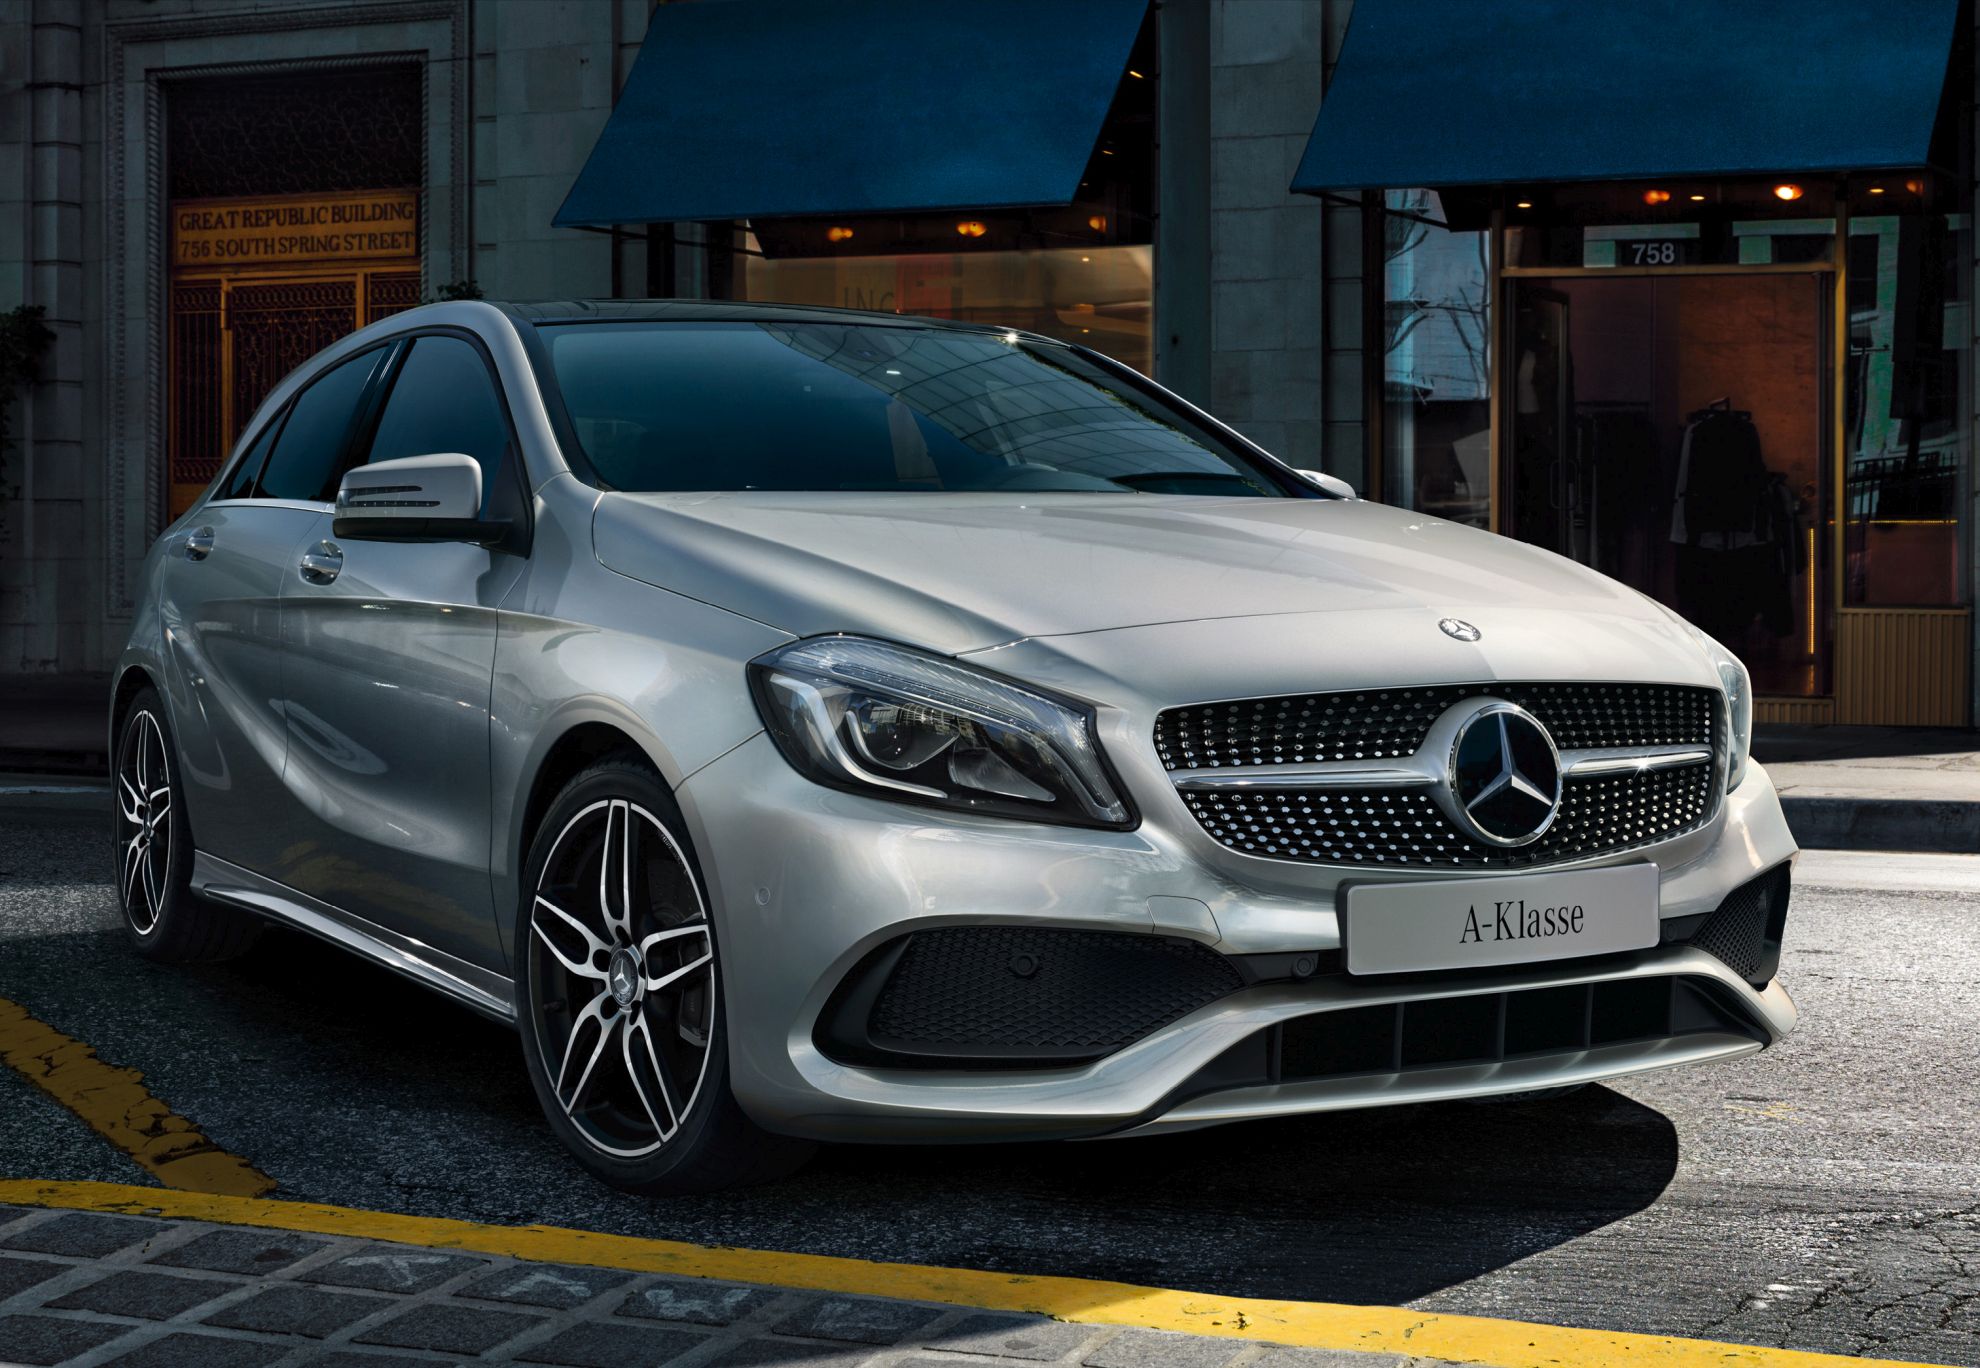 Mercedes-Benz starts campaign to mark launch of the new A-Class: The A-Class. Ready for a new generation.